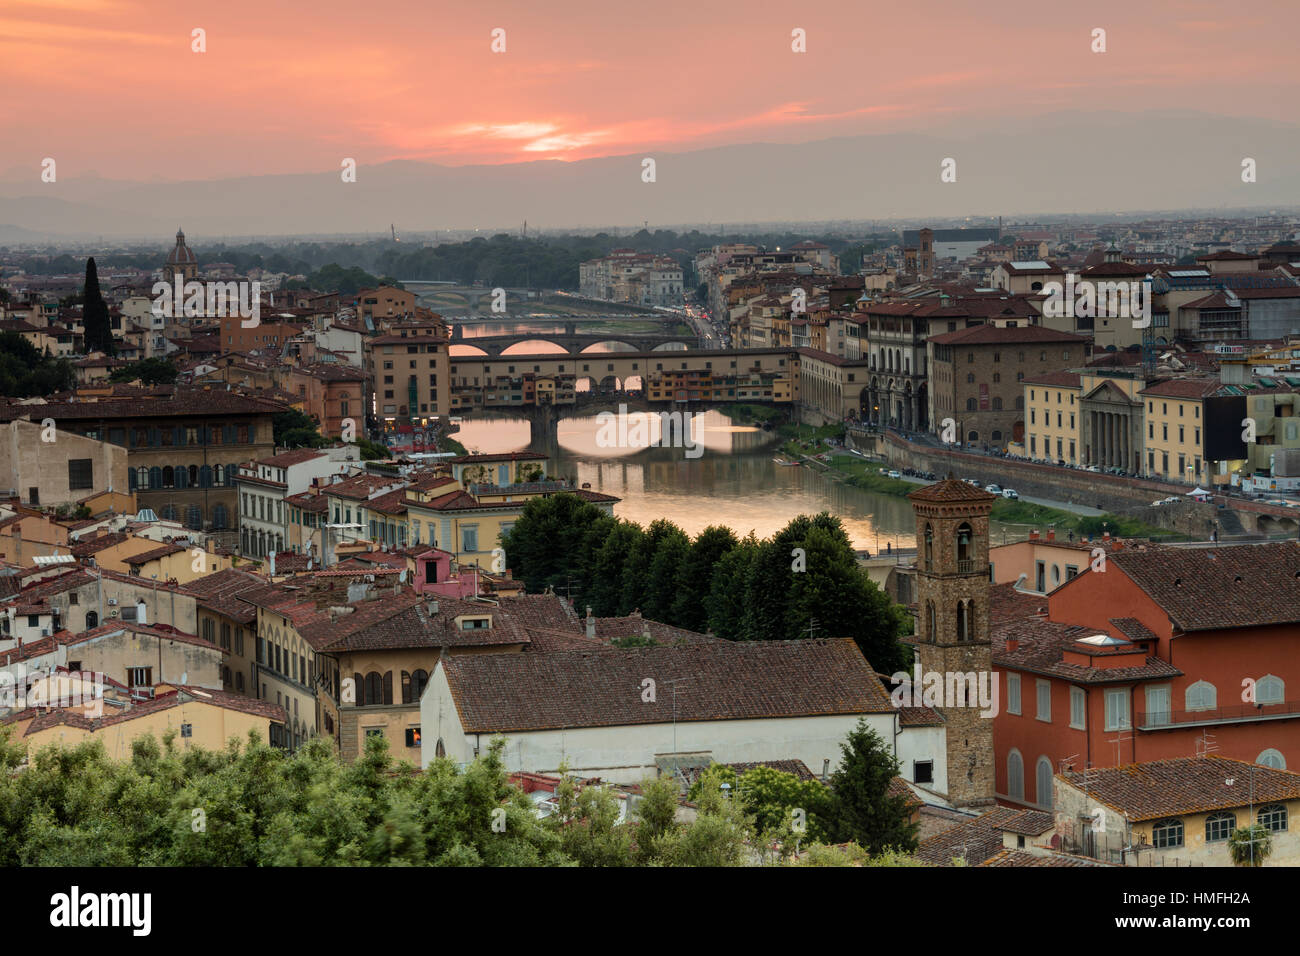 View of the Arno River and Ponte Vecchio at sunset from Piazzale Michelangelo, Florence, Tuscany, Italy Stock Photo